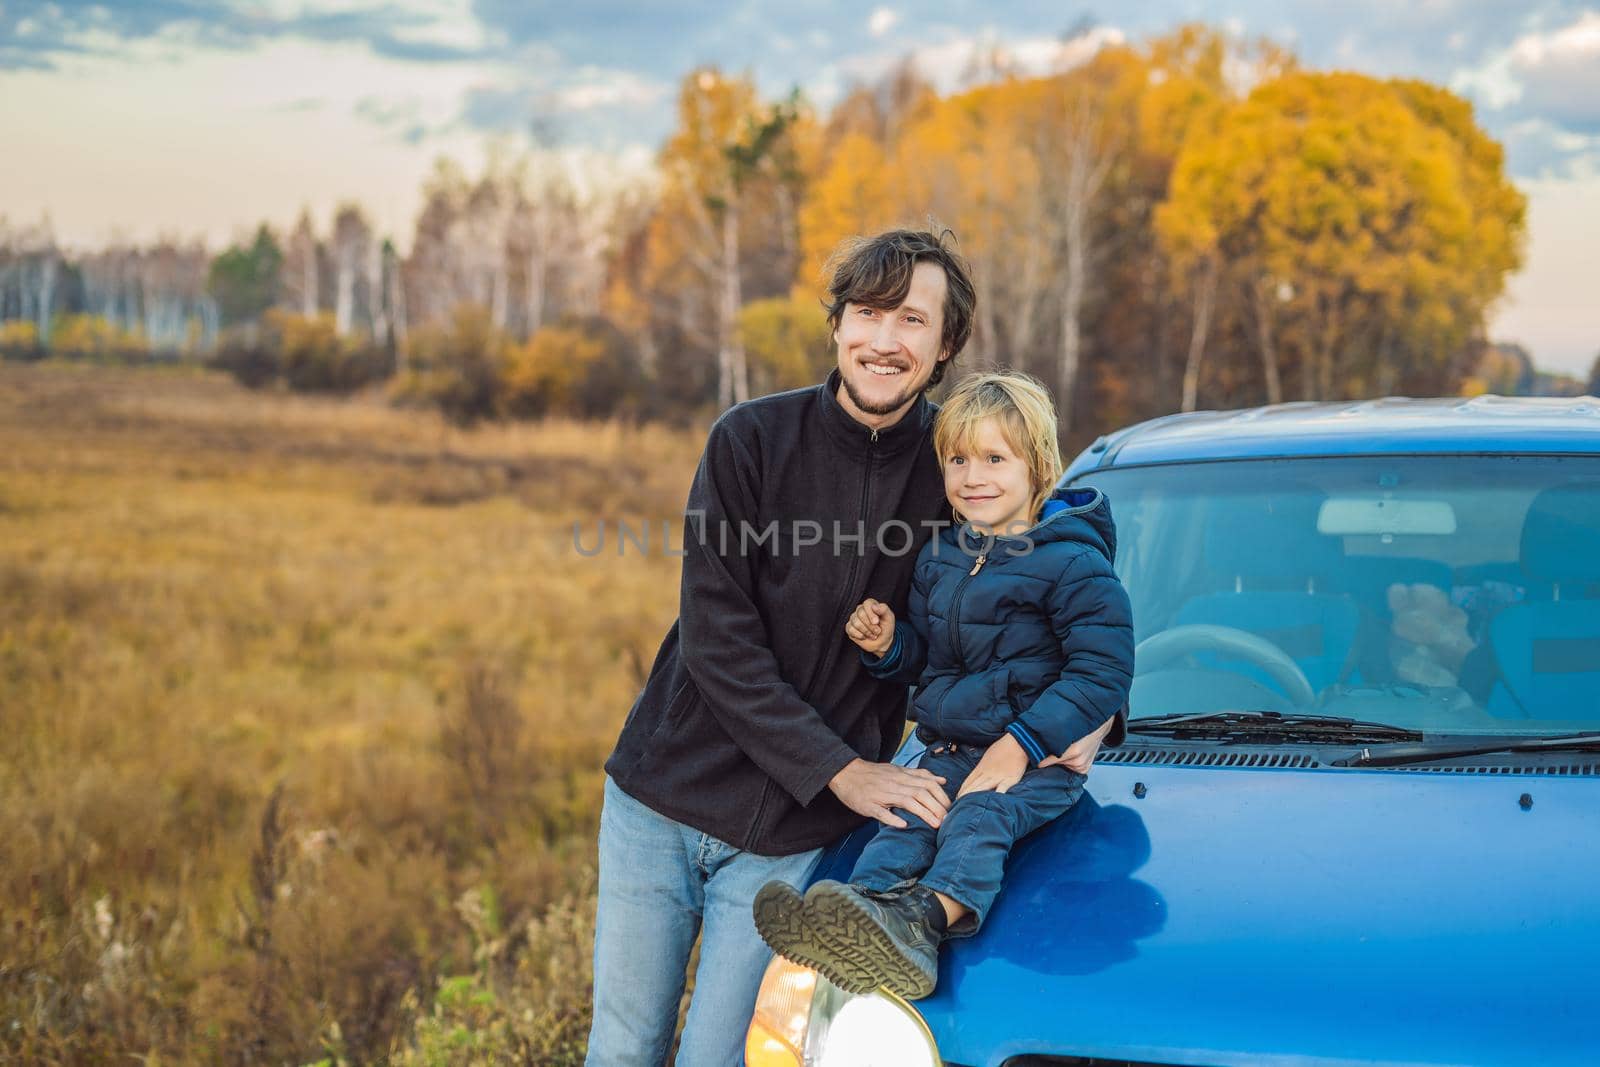 Dad and son are resting on the side of the road on a road trip. Road trip with children concept.